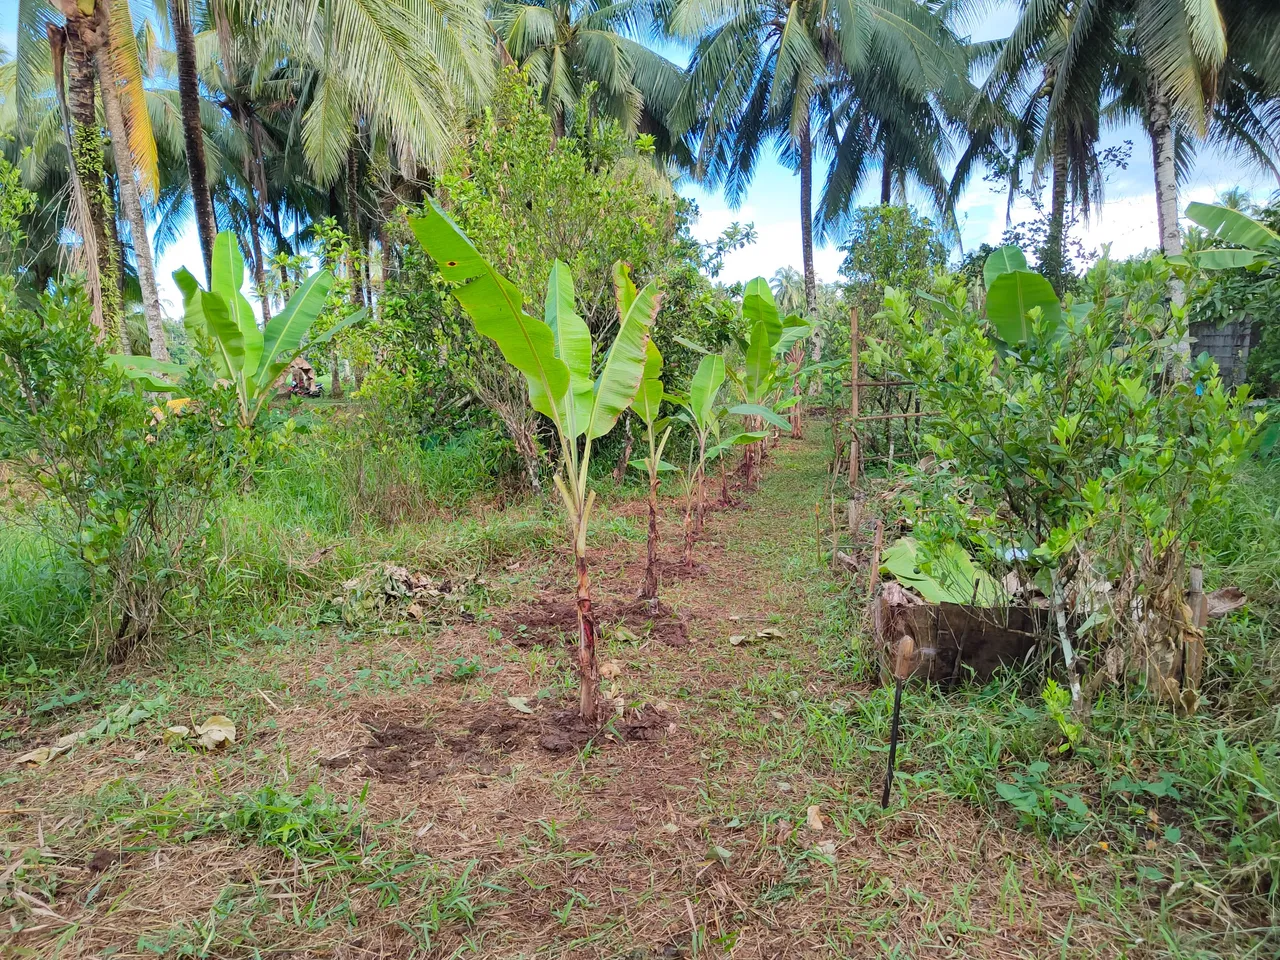 Growing more bananas in the food forest.